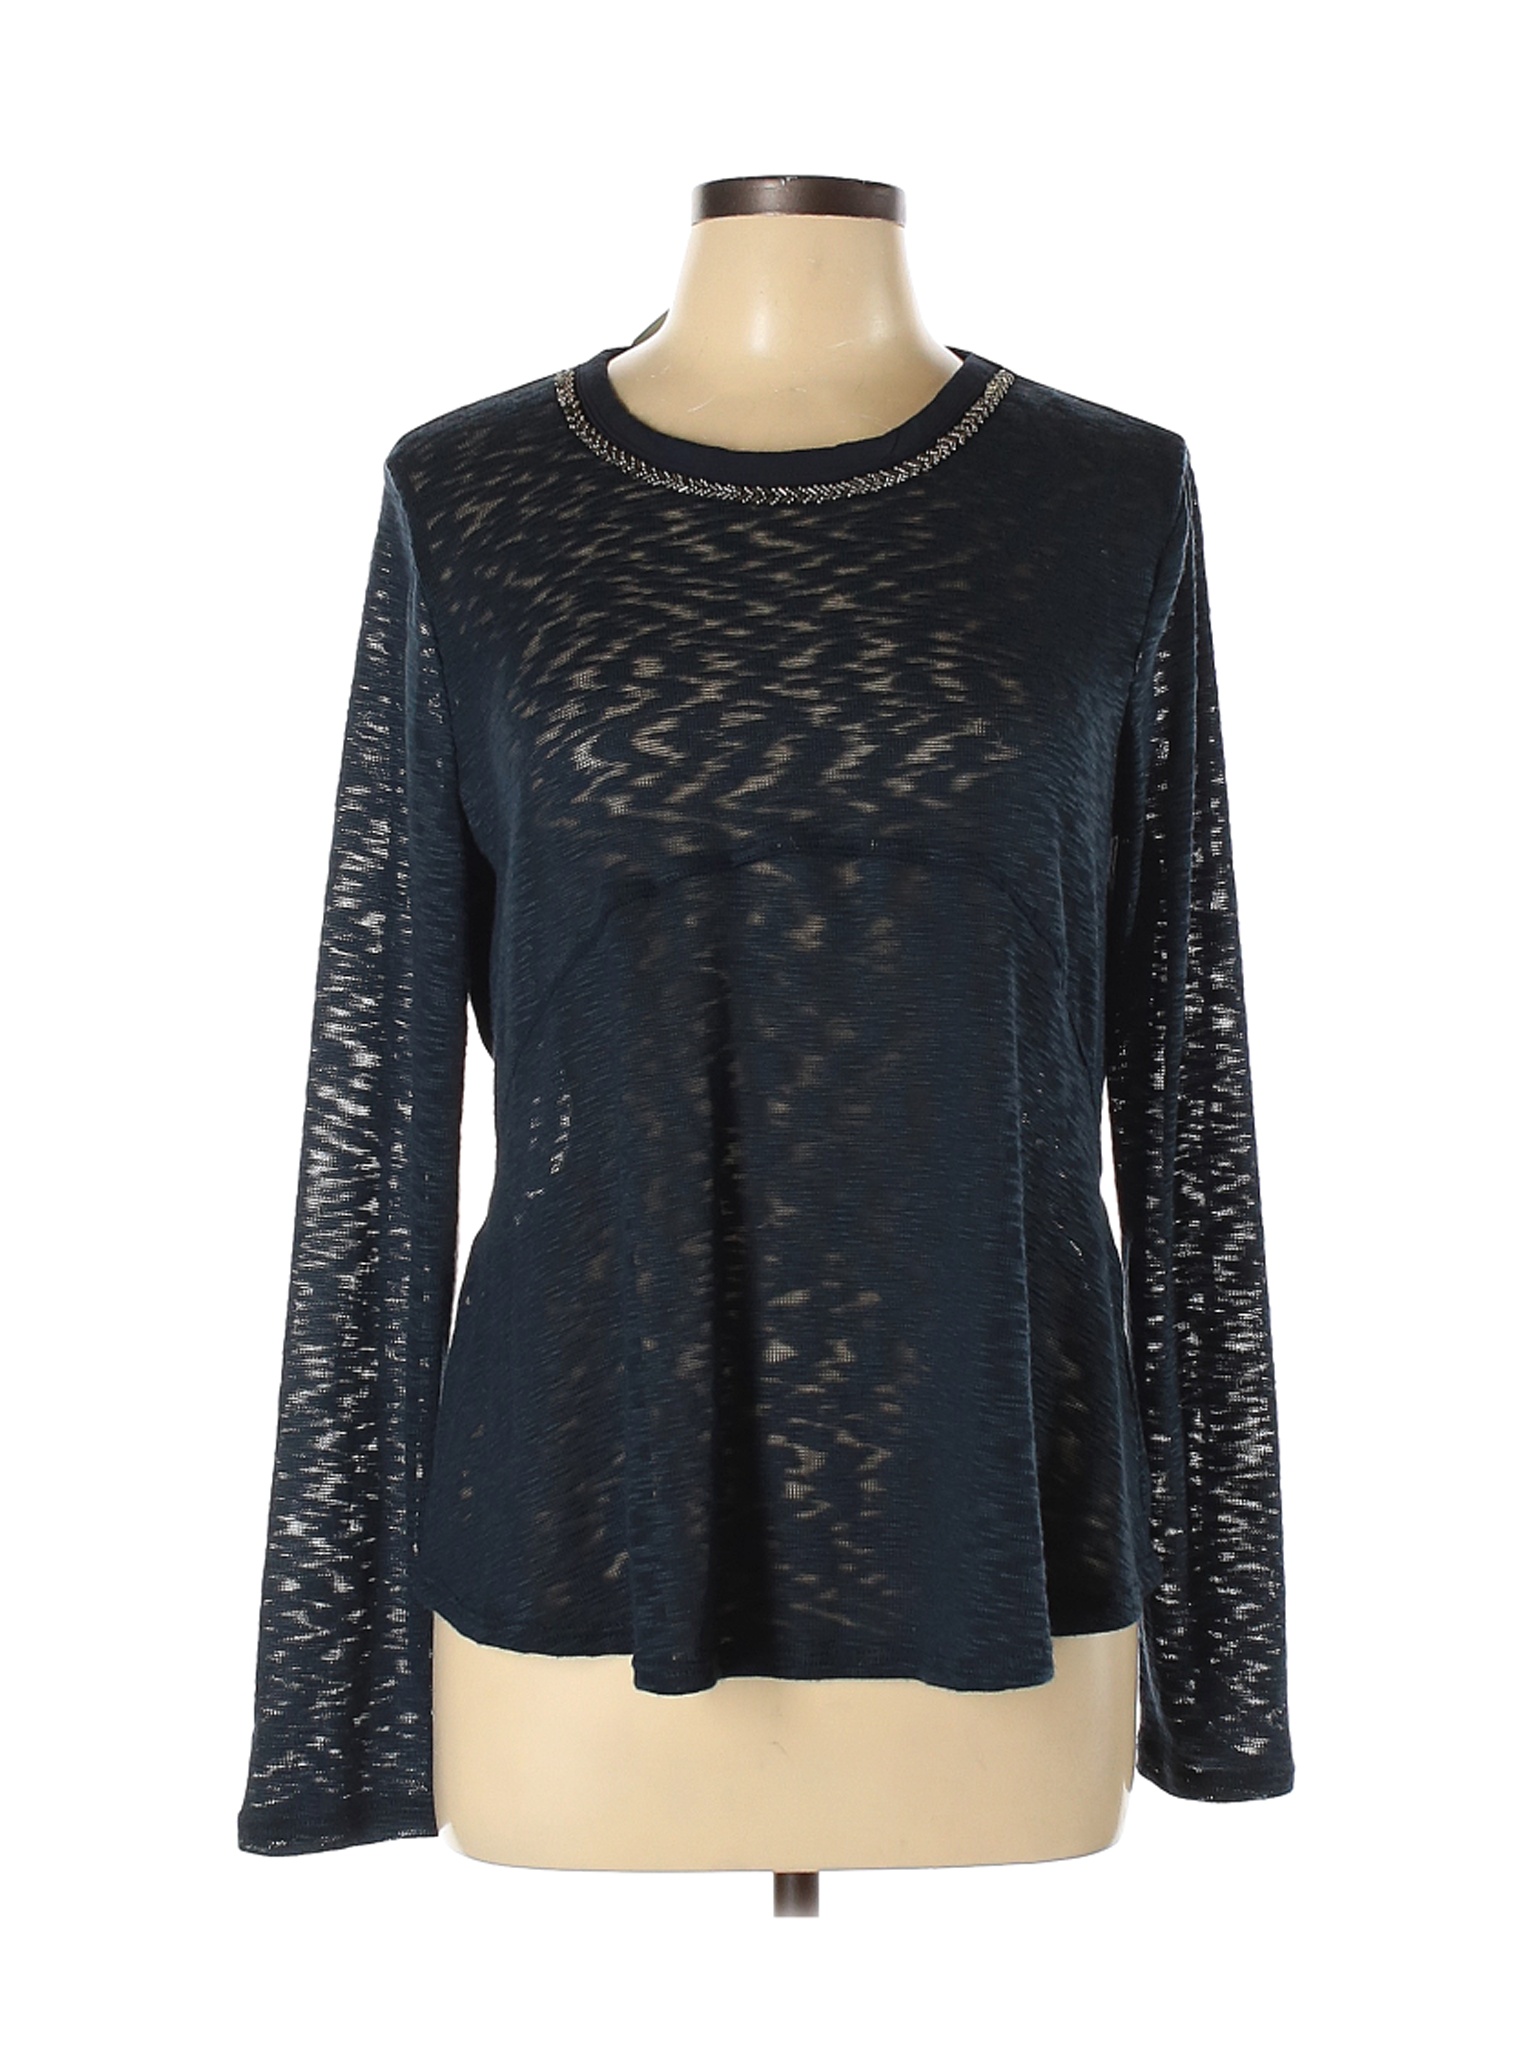 NWT Maurices Women Blue Long Sleeve Top L | eBay